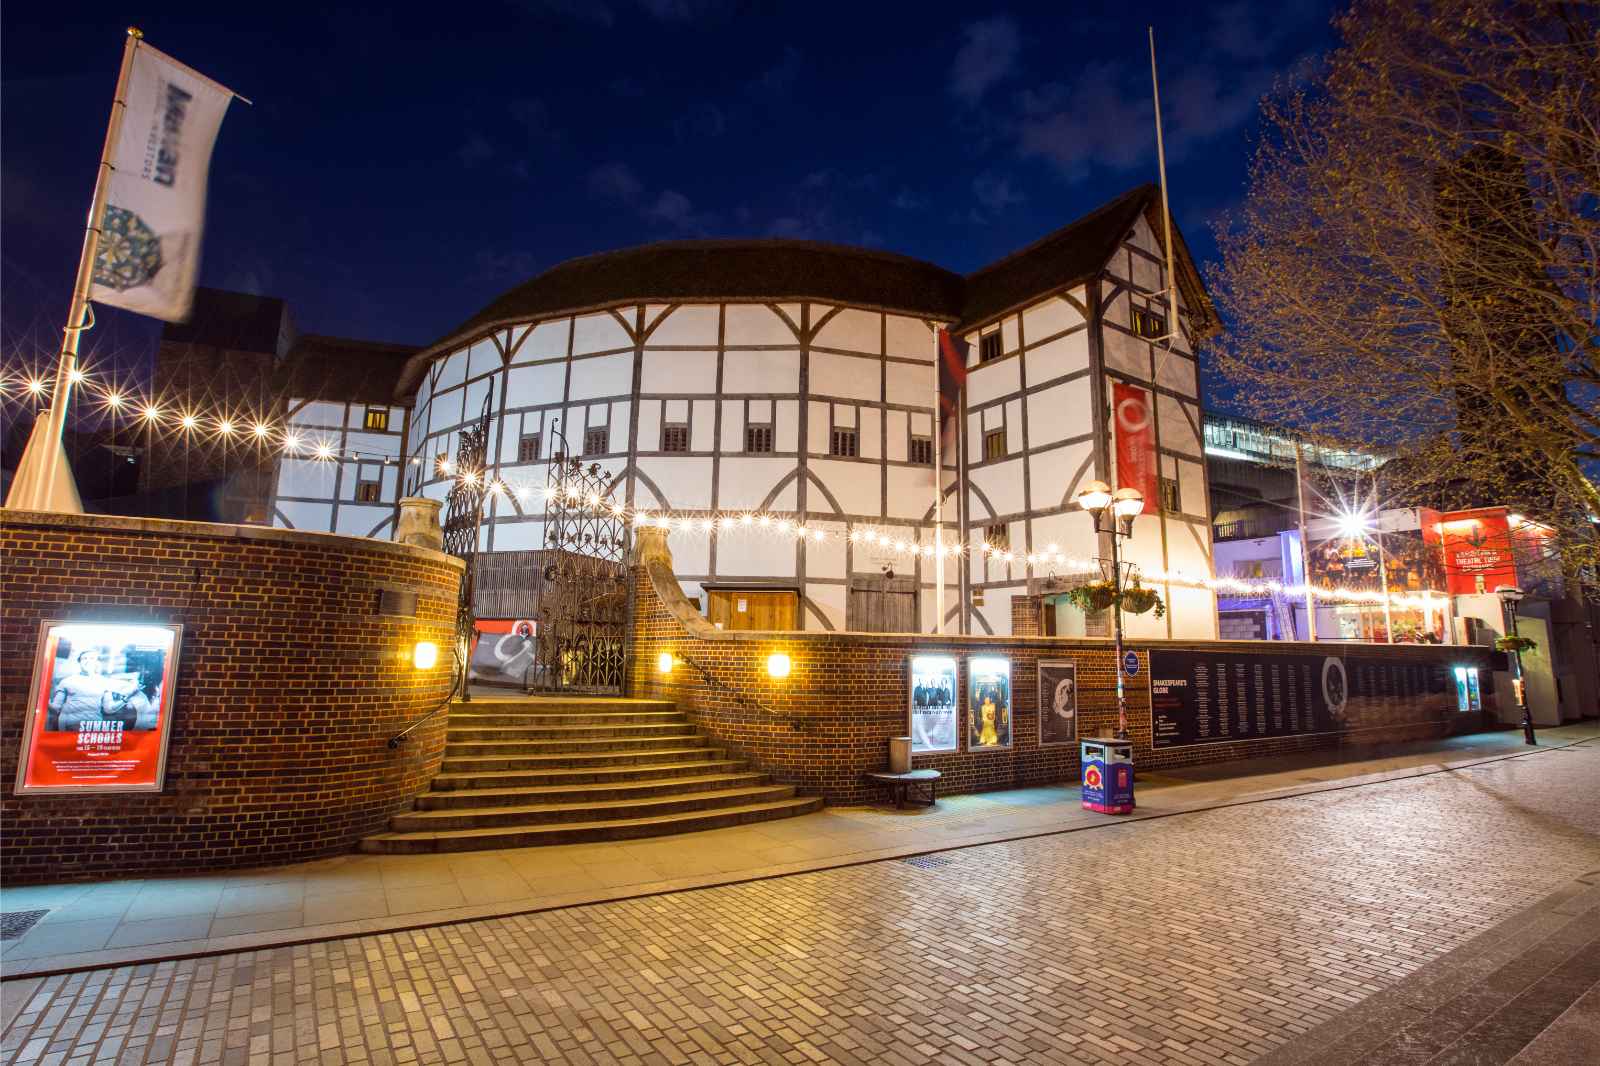 West End Show Shakespeares Globe Theatre